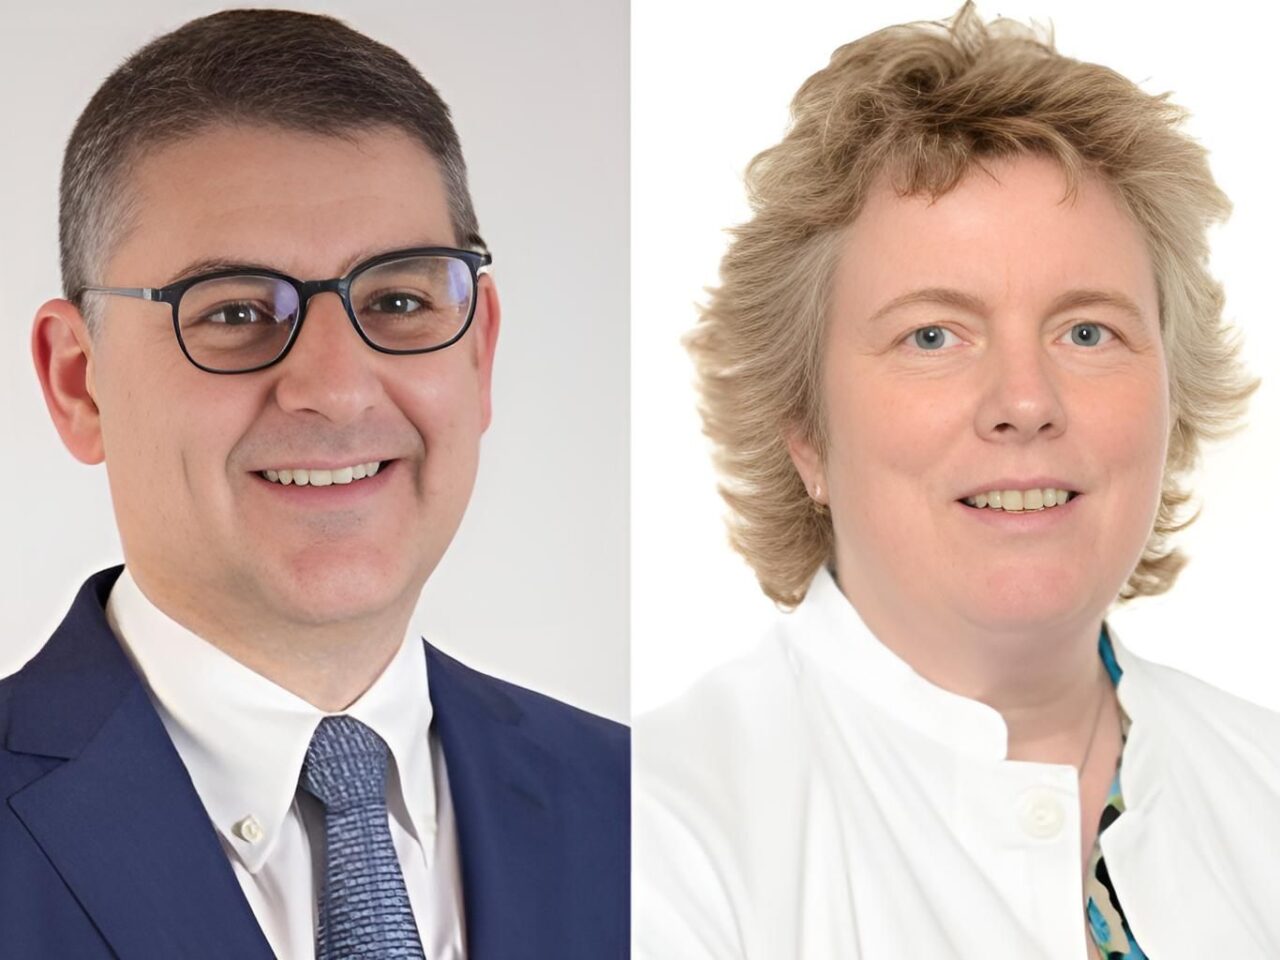 The names of the candidates running for the ESMO Presidency 2027-2028 have been announced